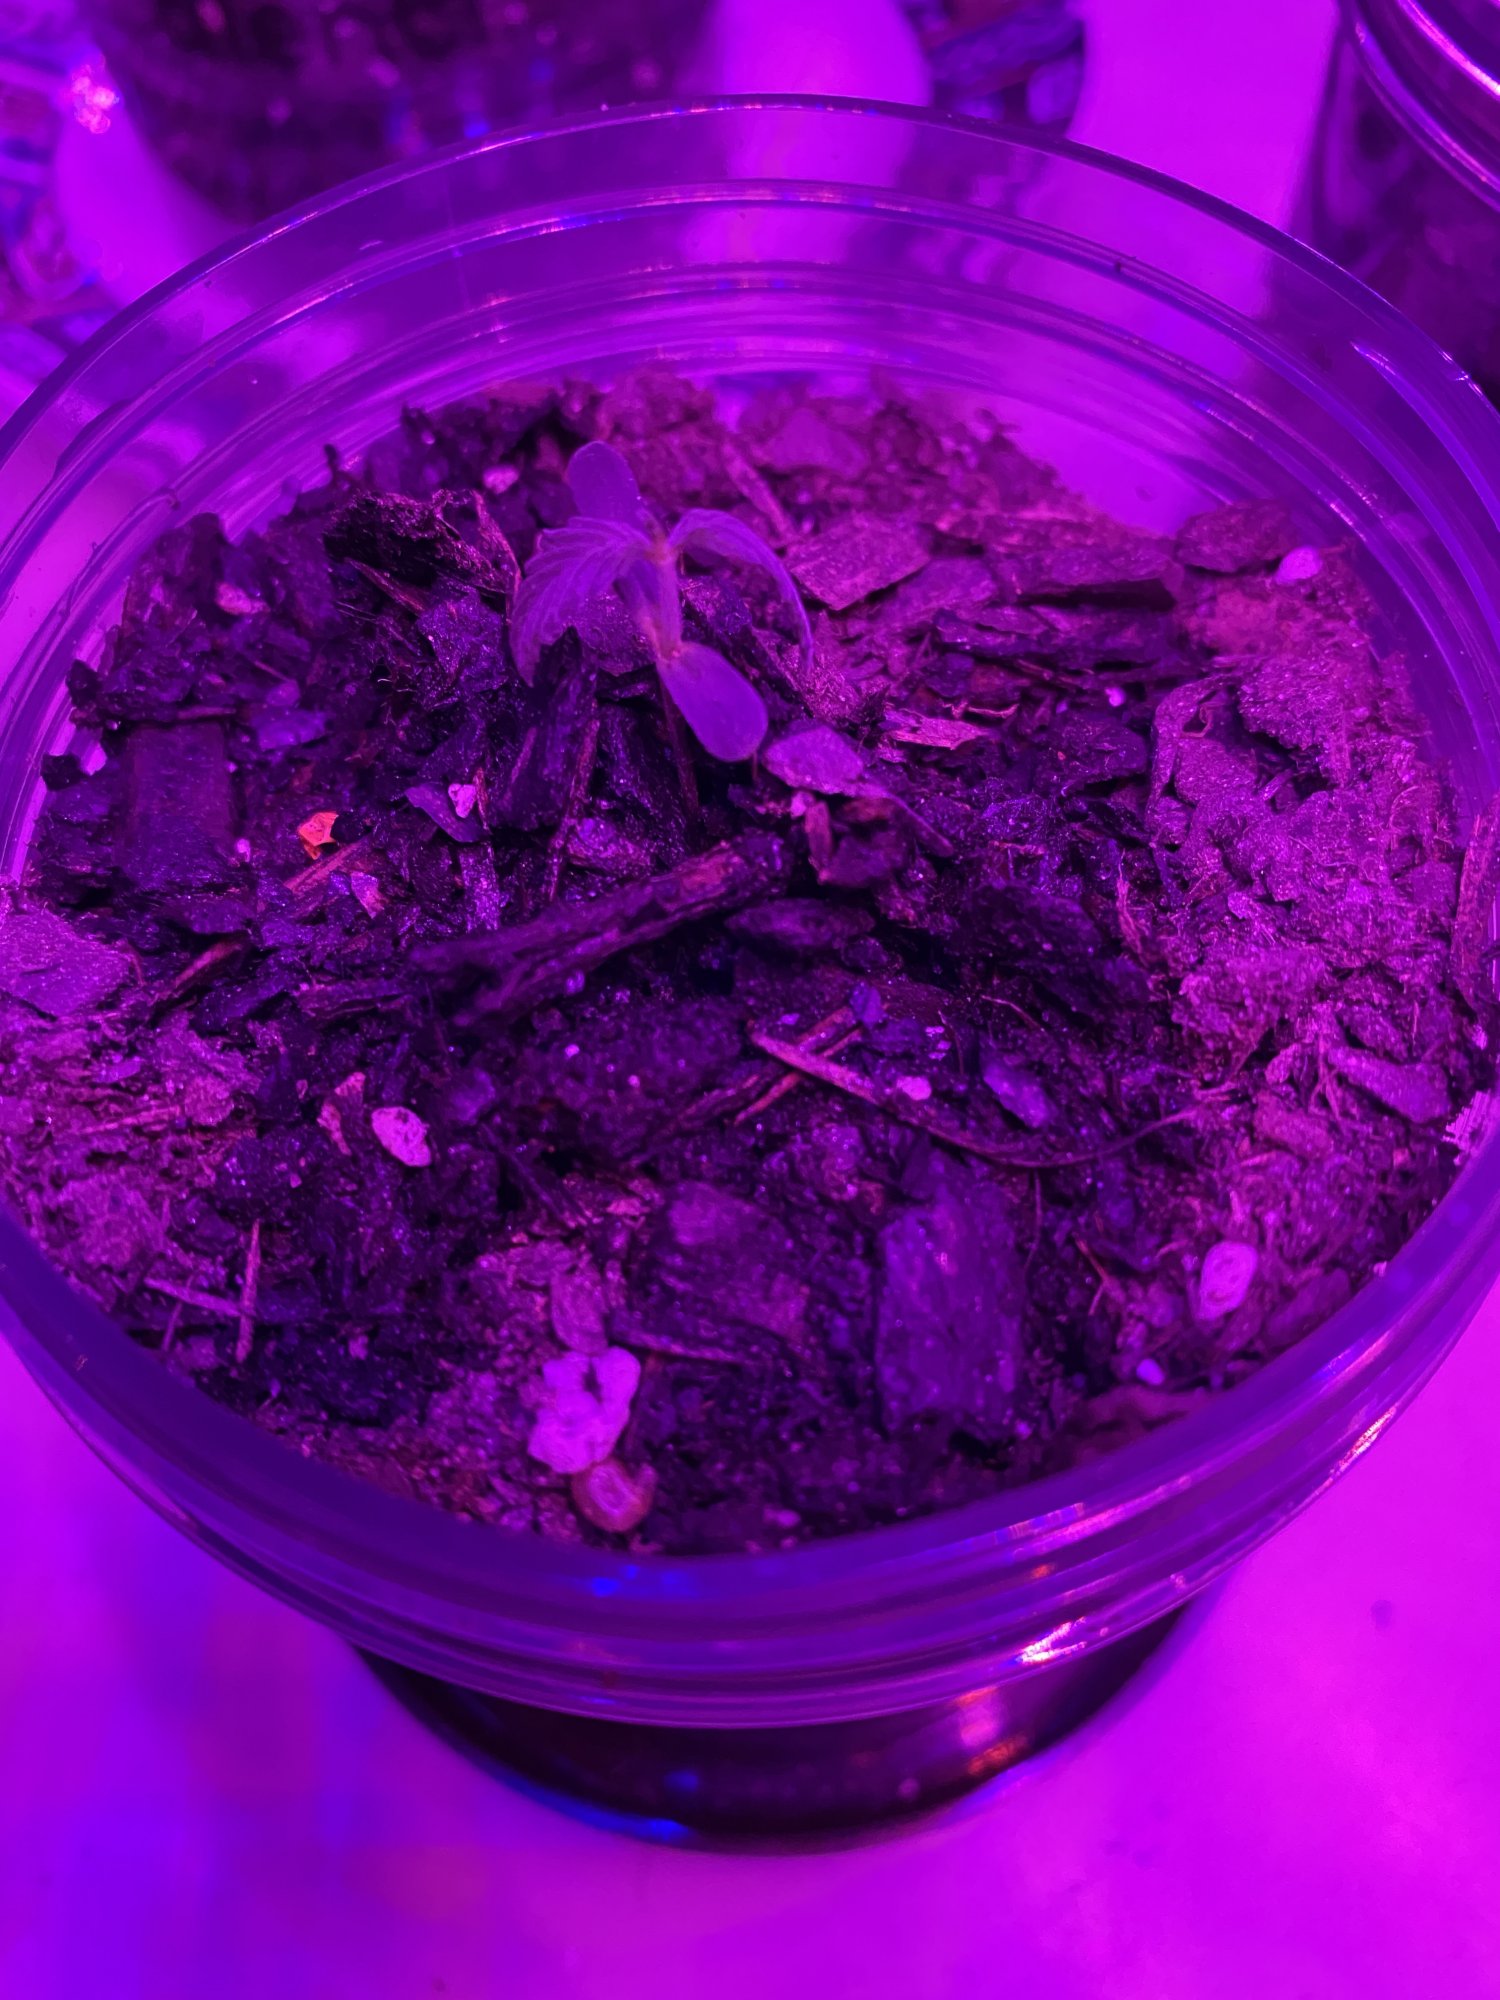 My seedling looks like its dying  any ideas why 2